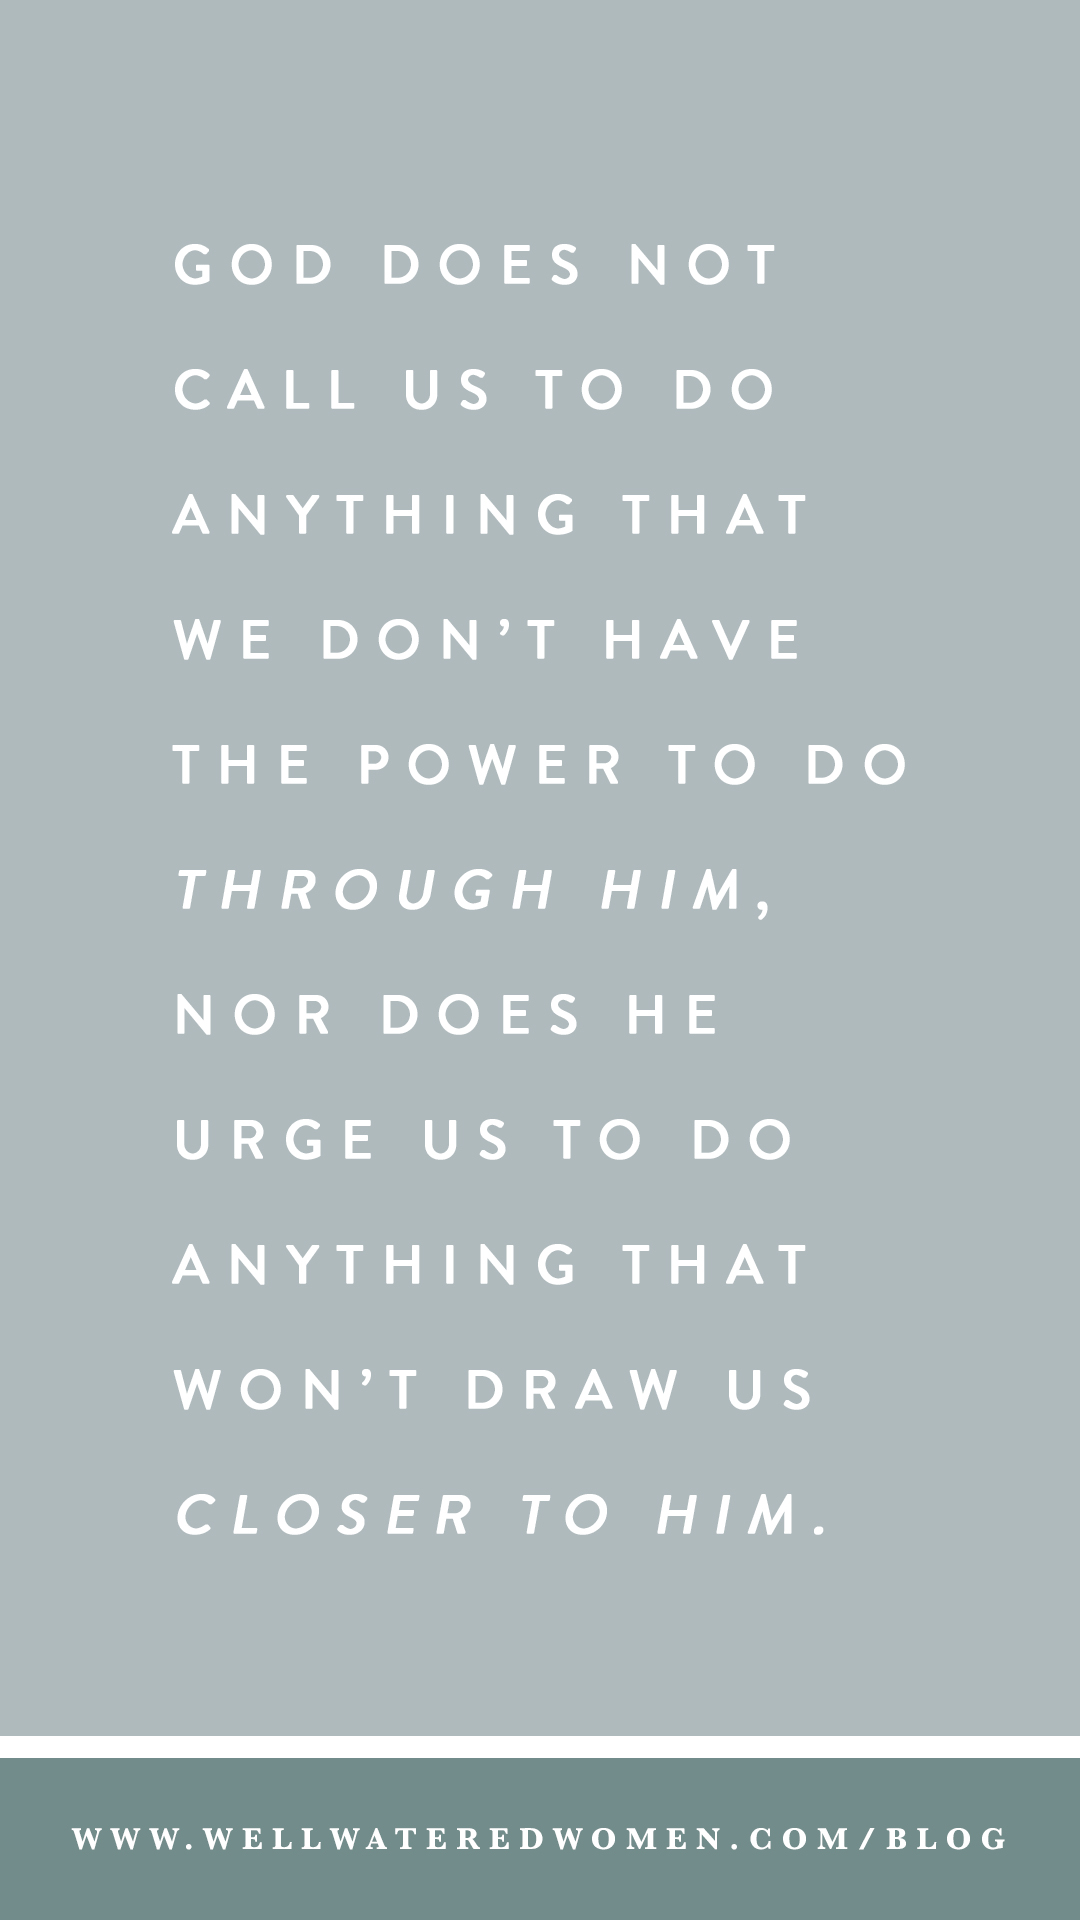 God does not call us to do anything that we don’t have the power to do through Him, nor does He urge us to do anything that won’t draw us closer to Him.